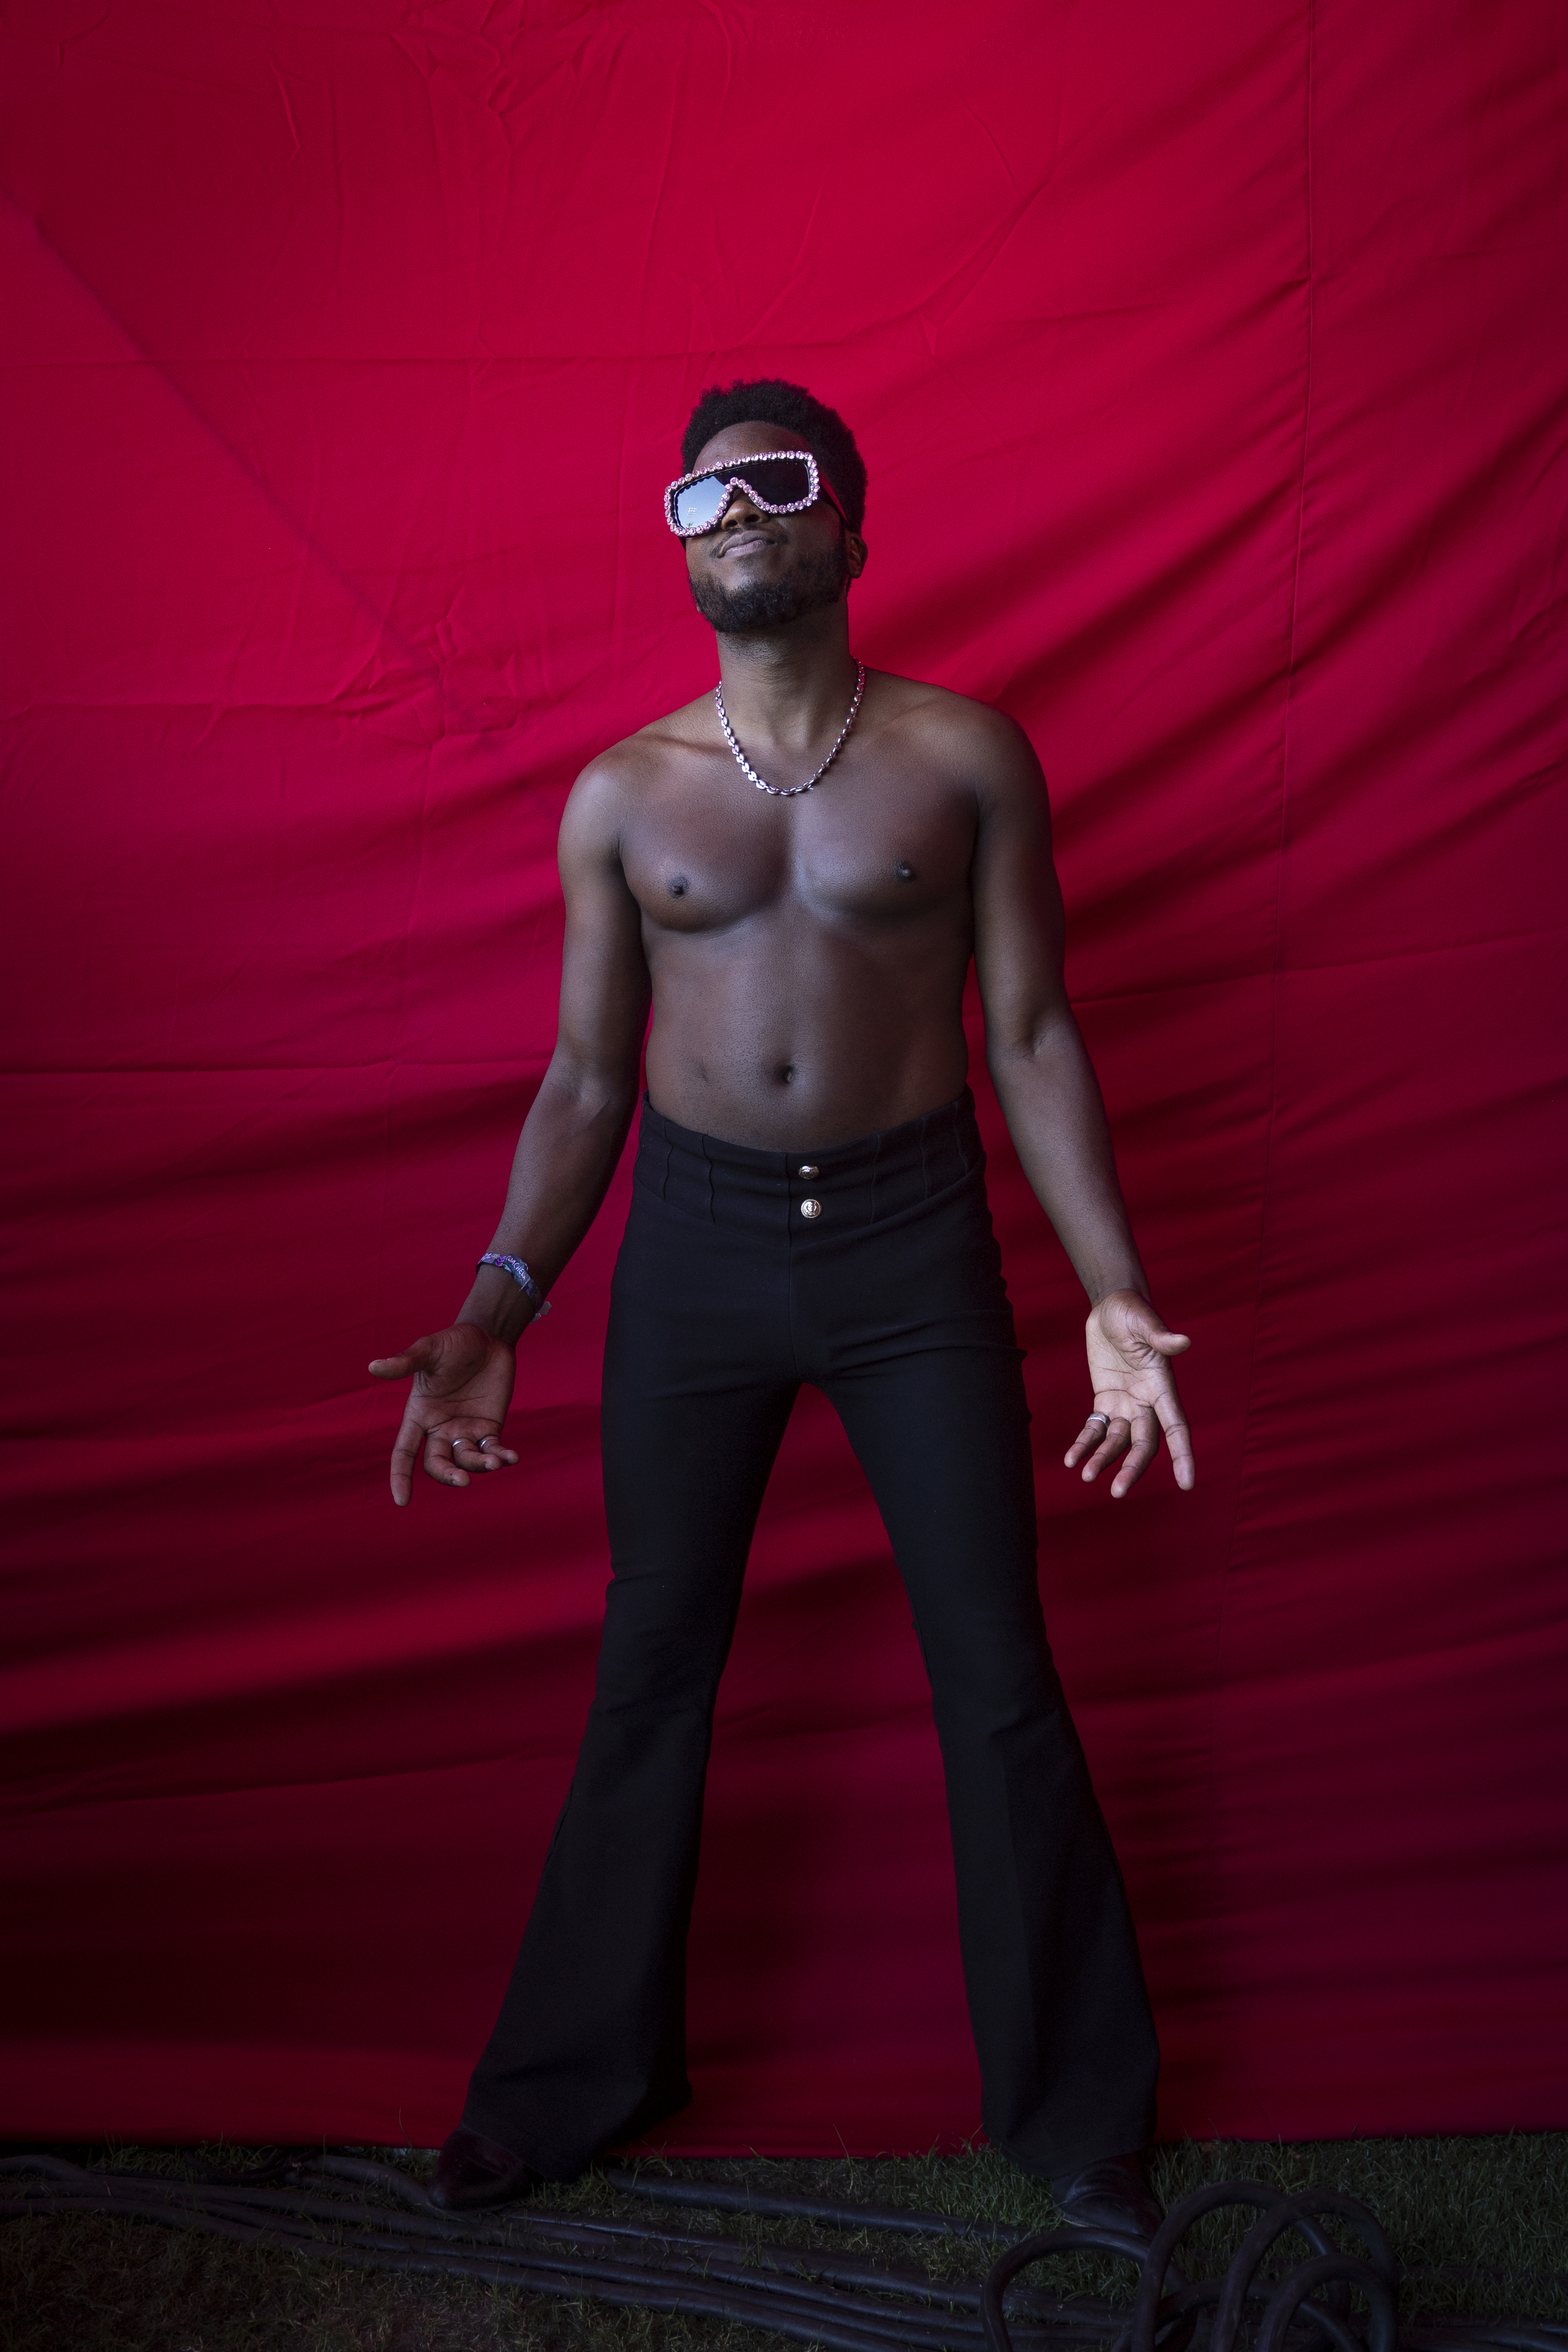 Man with sunglasses and black pants posing against red backdrop